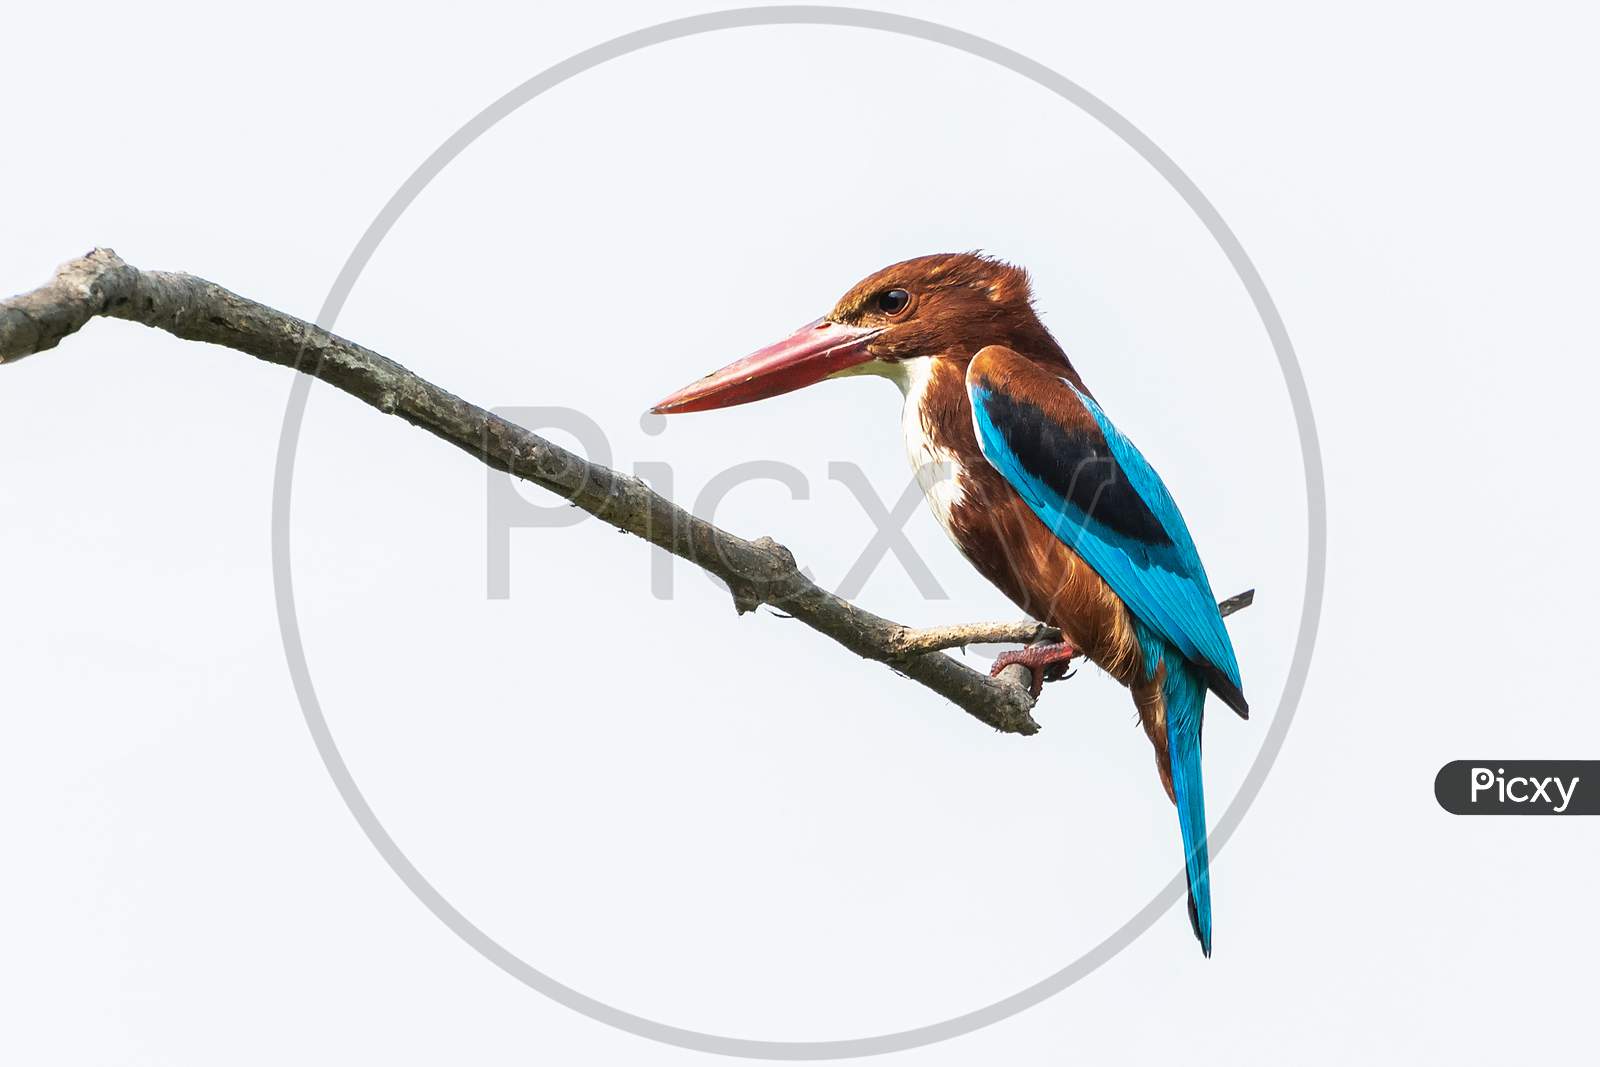 White-Breasted Kingfisher Or White-Throated Kingfisher (Halcyon Smyrnensis)